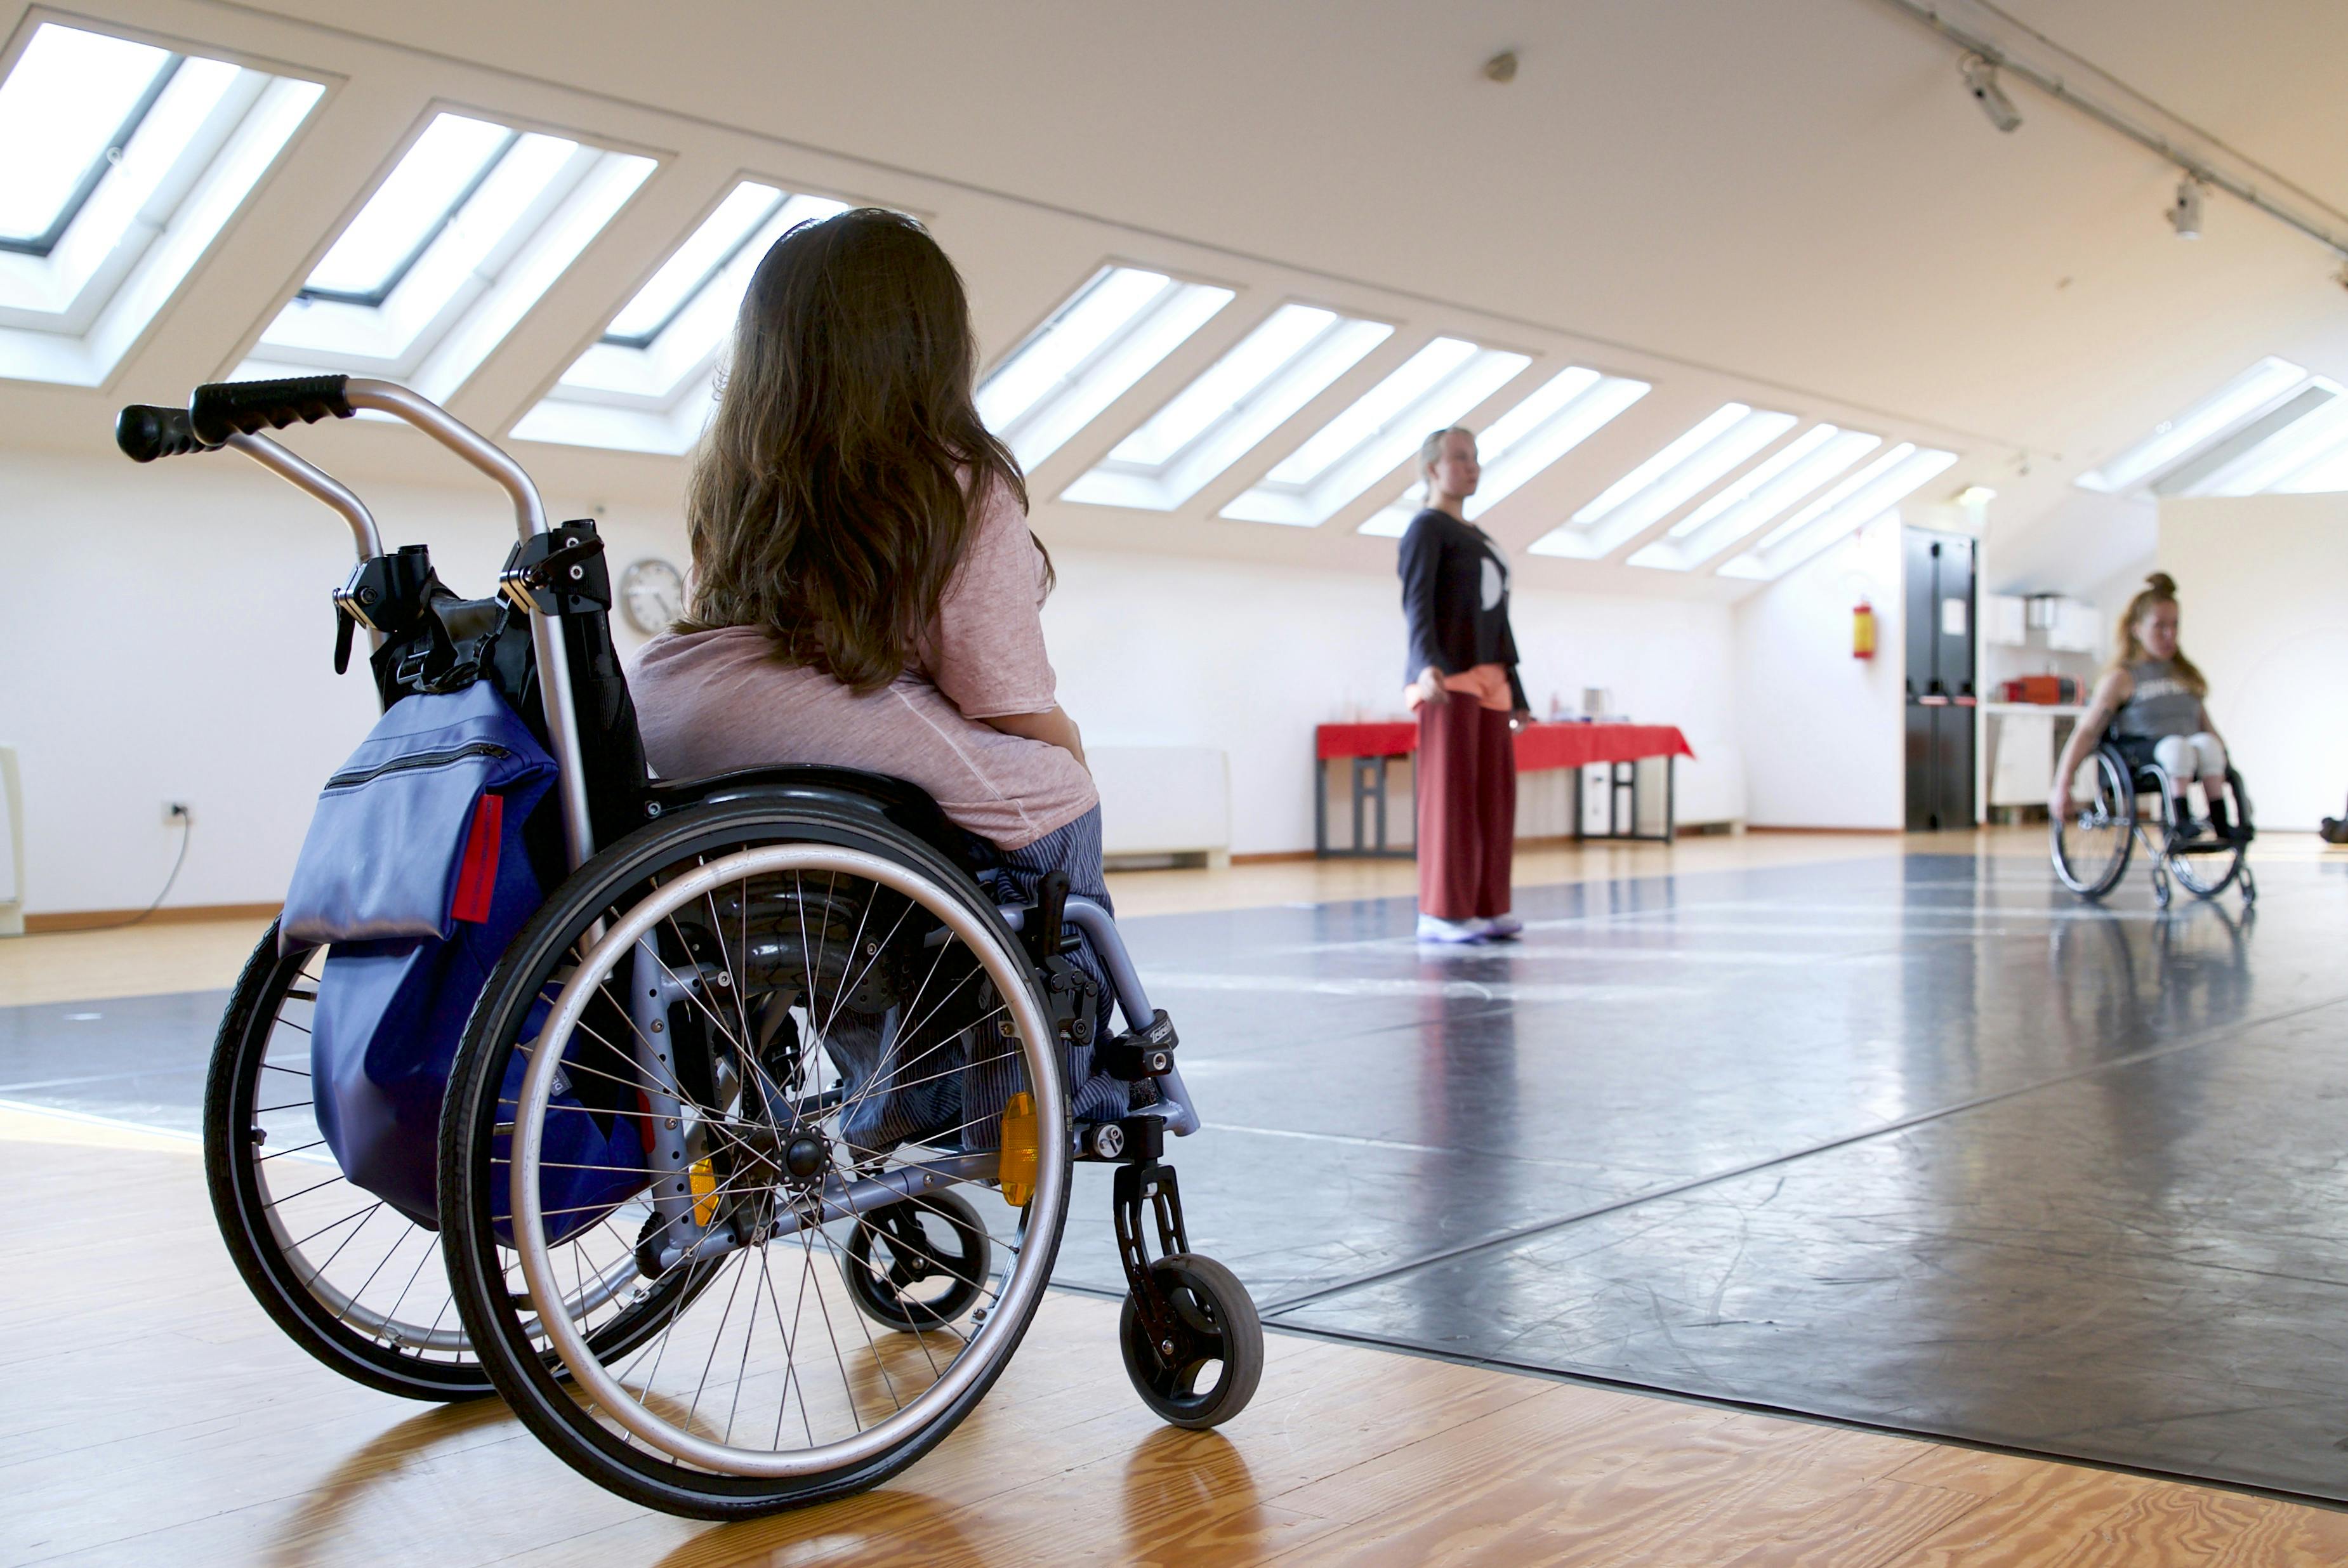 In the foreground Chiara Bersani, on her back, in a wheelchair, observes the dancers of Danskomapaniet SPINN moving through space. In the distance we see a dancer standing and a second one sitting in a wheelchair.